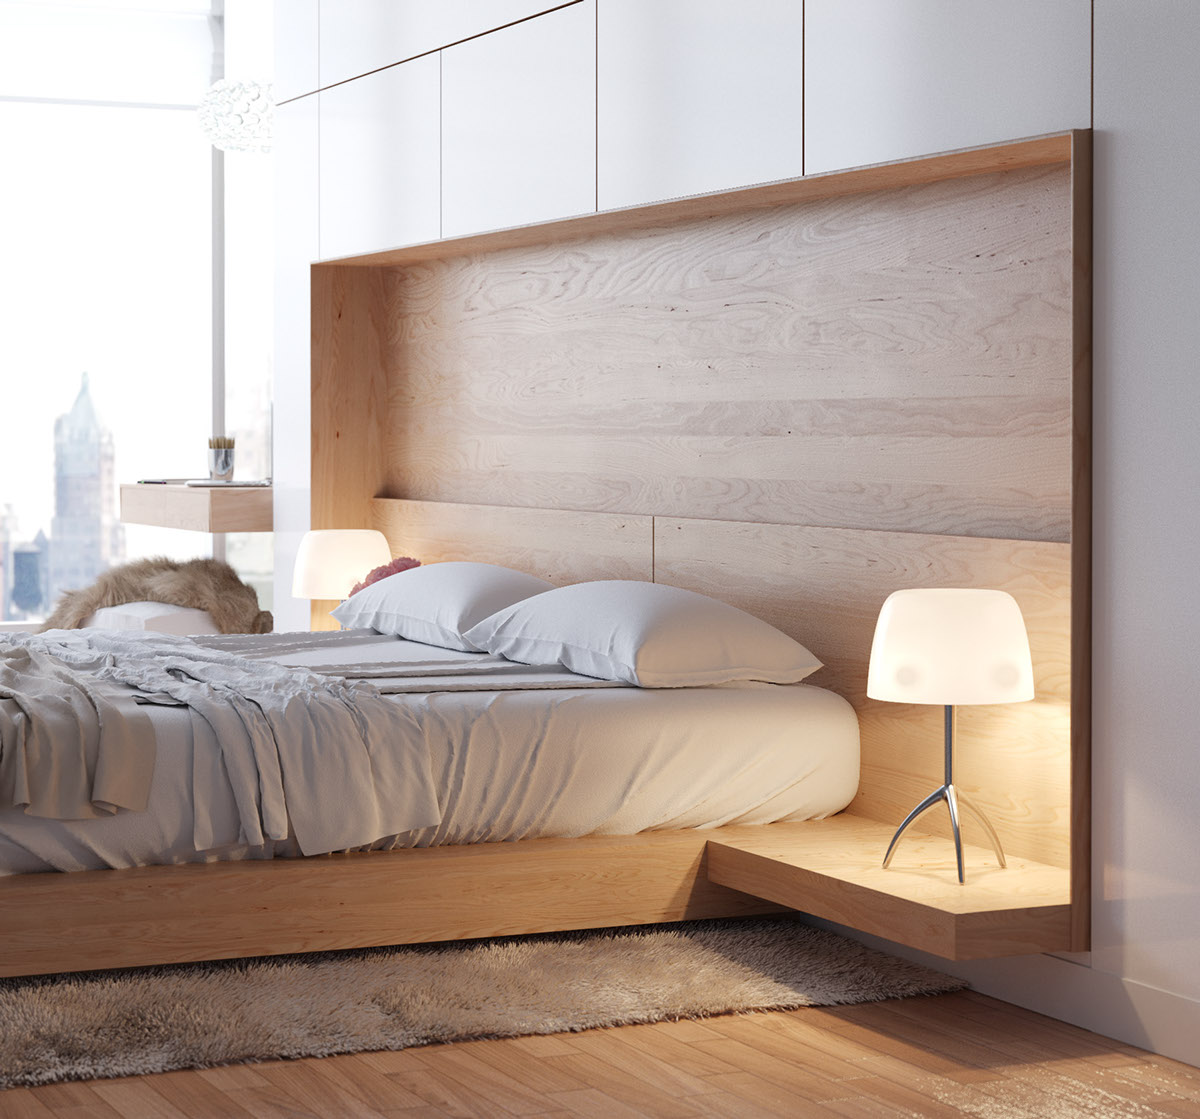  Bed With Built In Side Tables for Simple Design